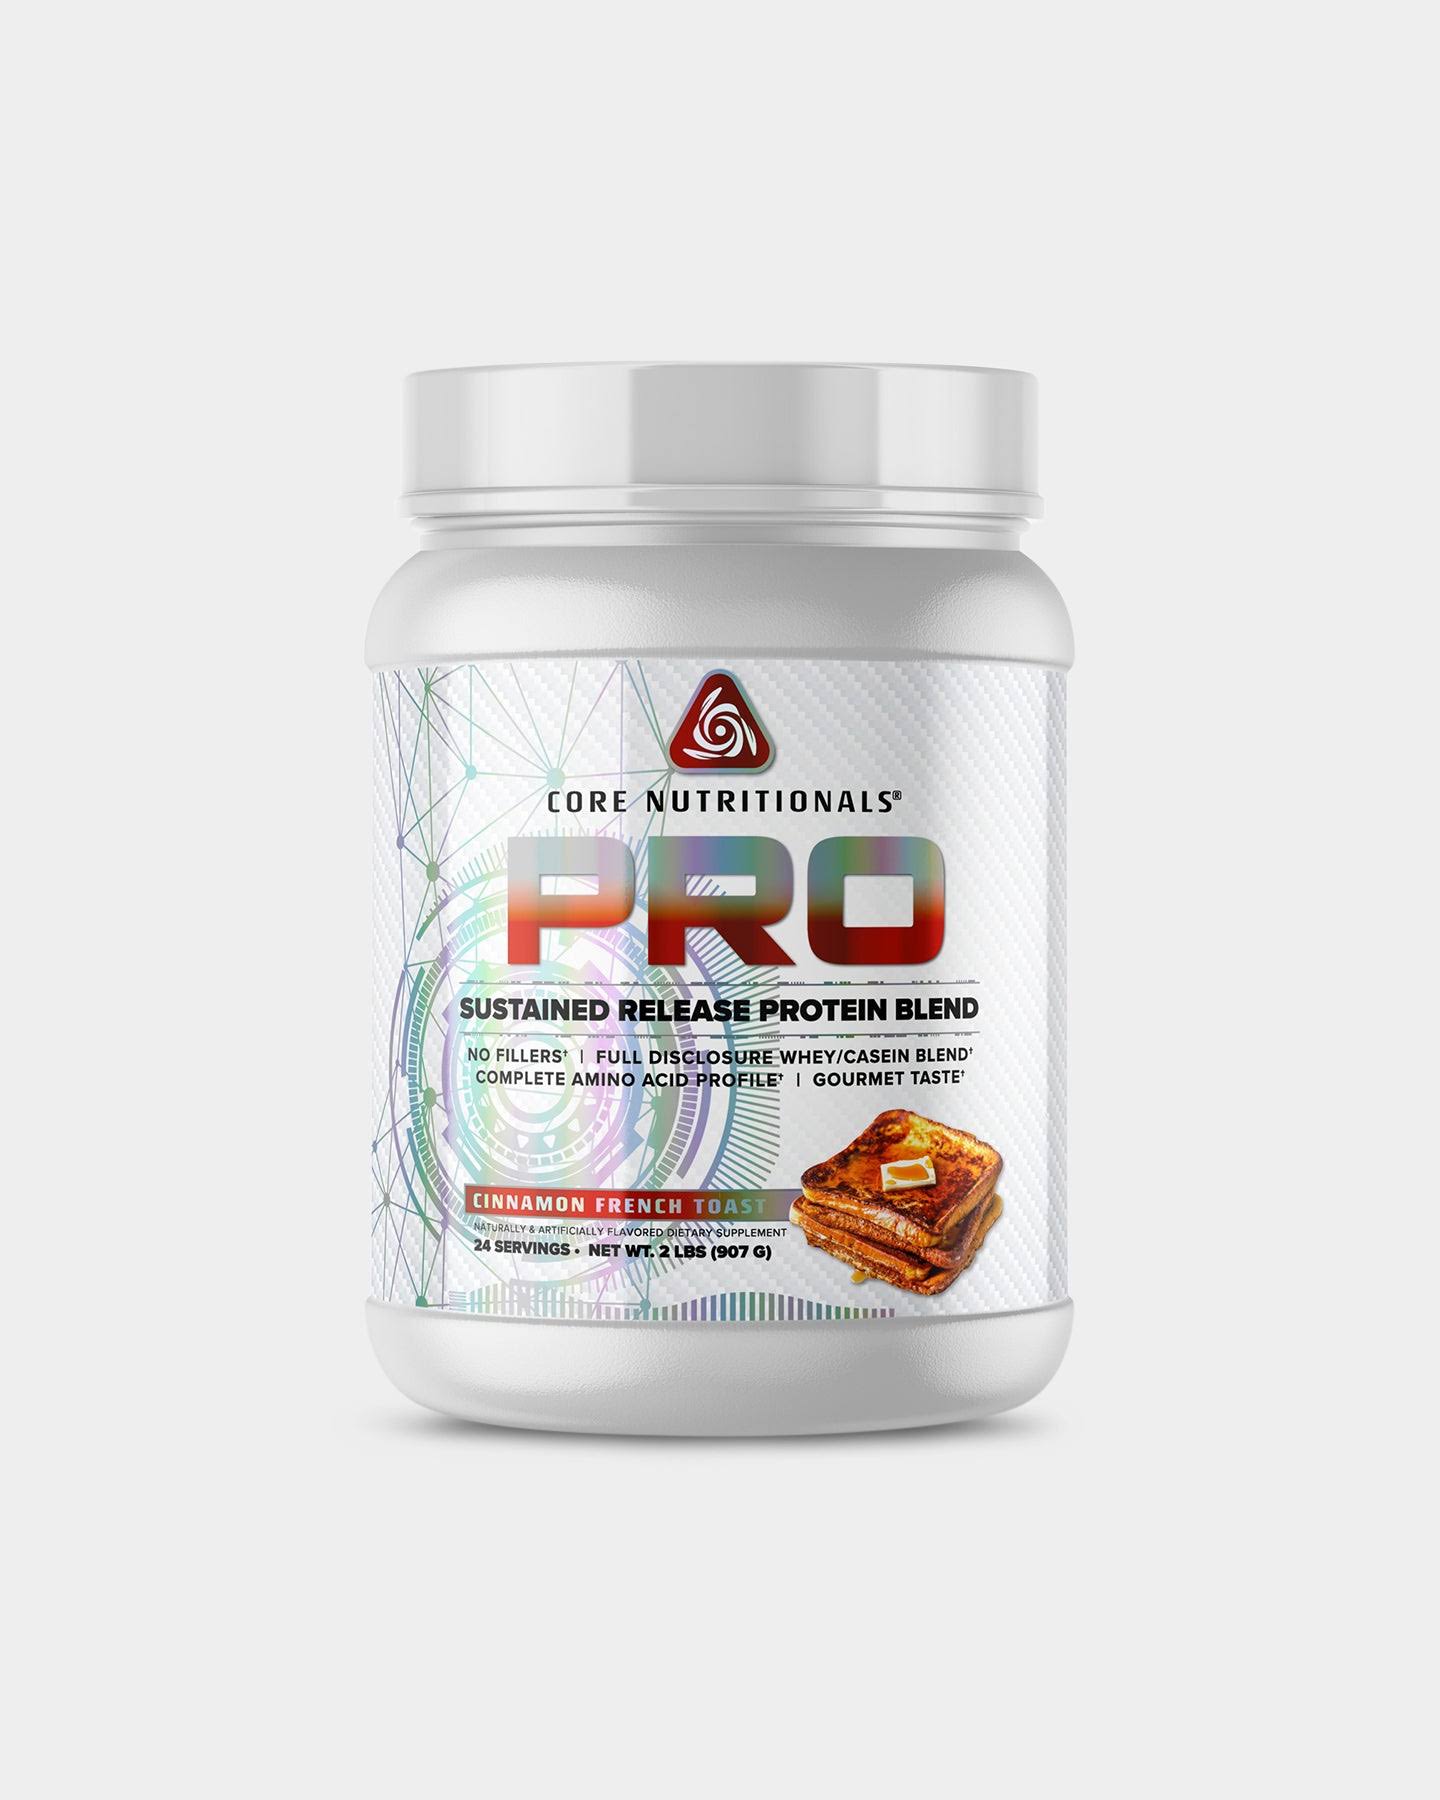 Core Nutritionals Pro Protein Cinnamon French Toast 2lb